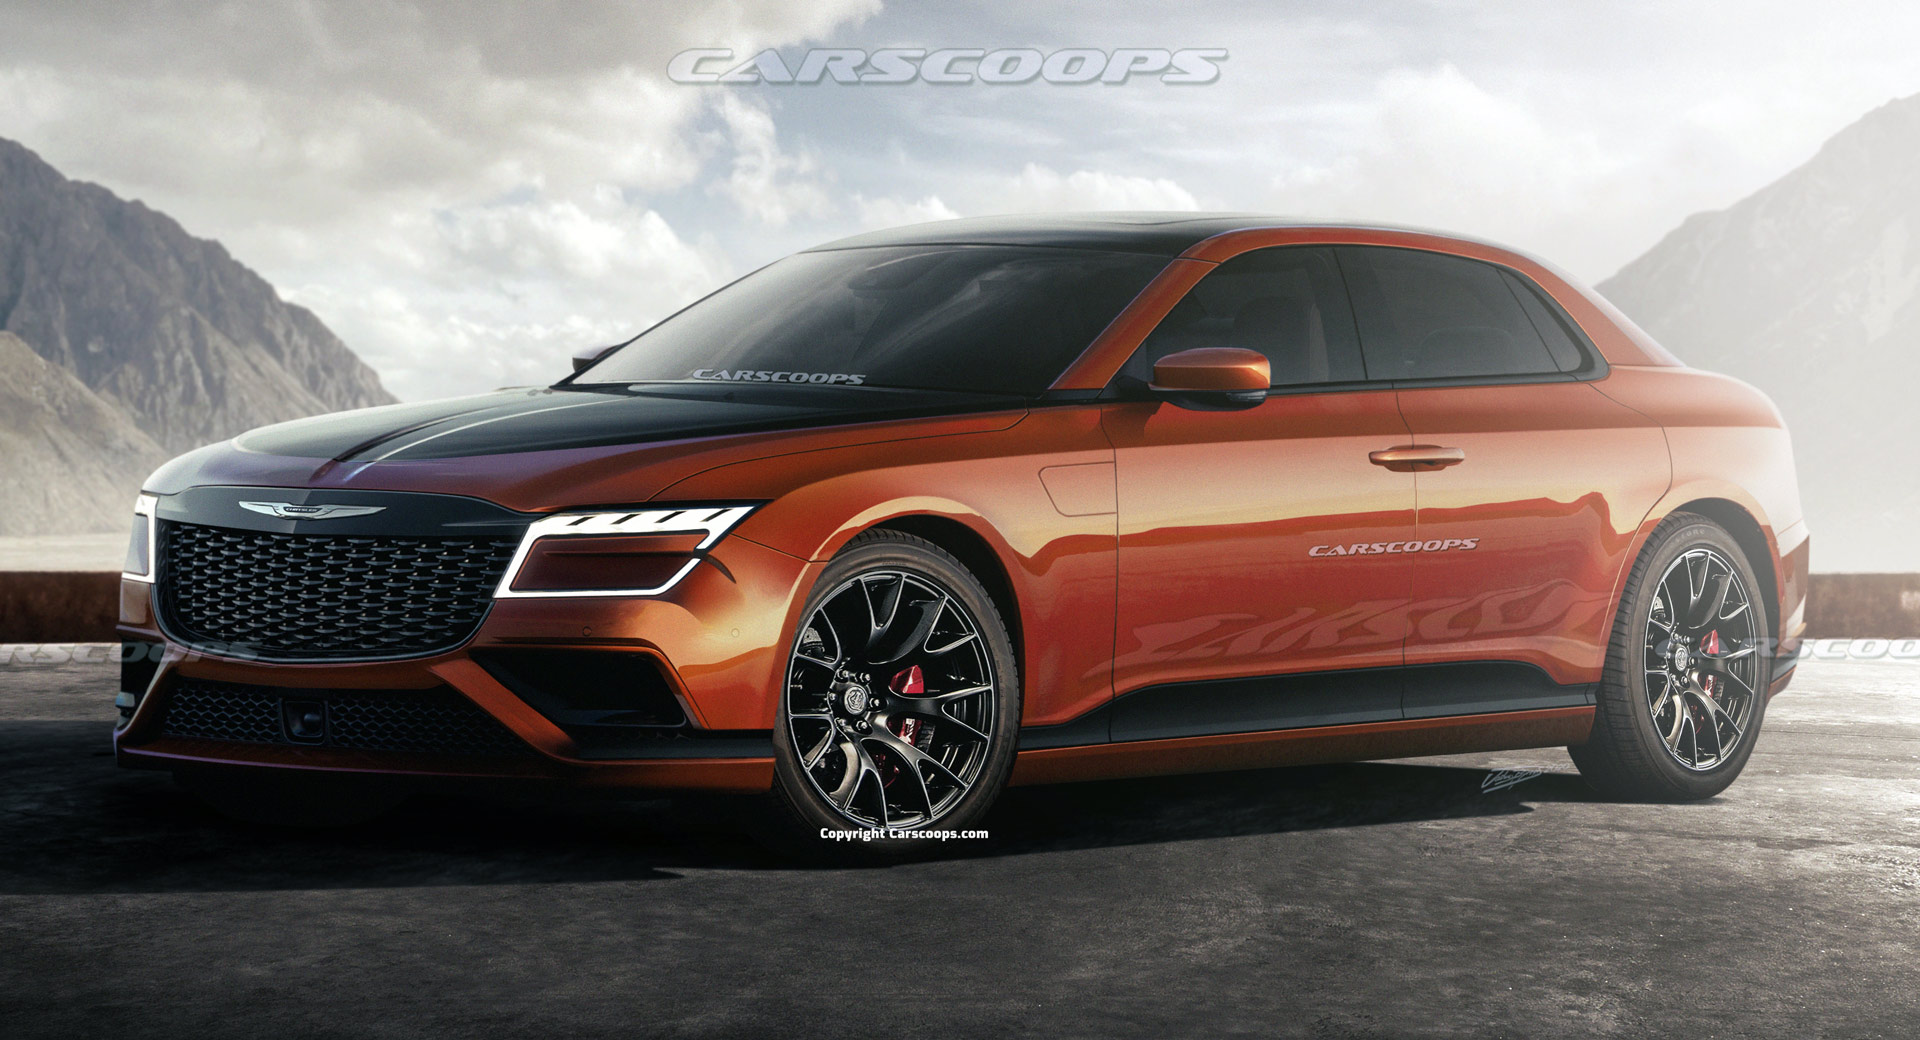 2025 Chrysler 300: Visualizing An Electrified Successor For The